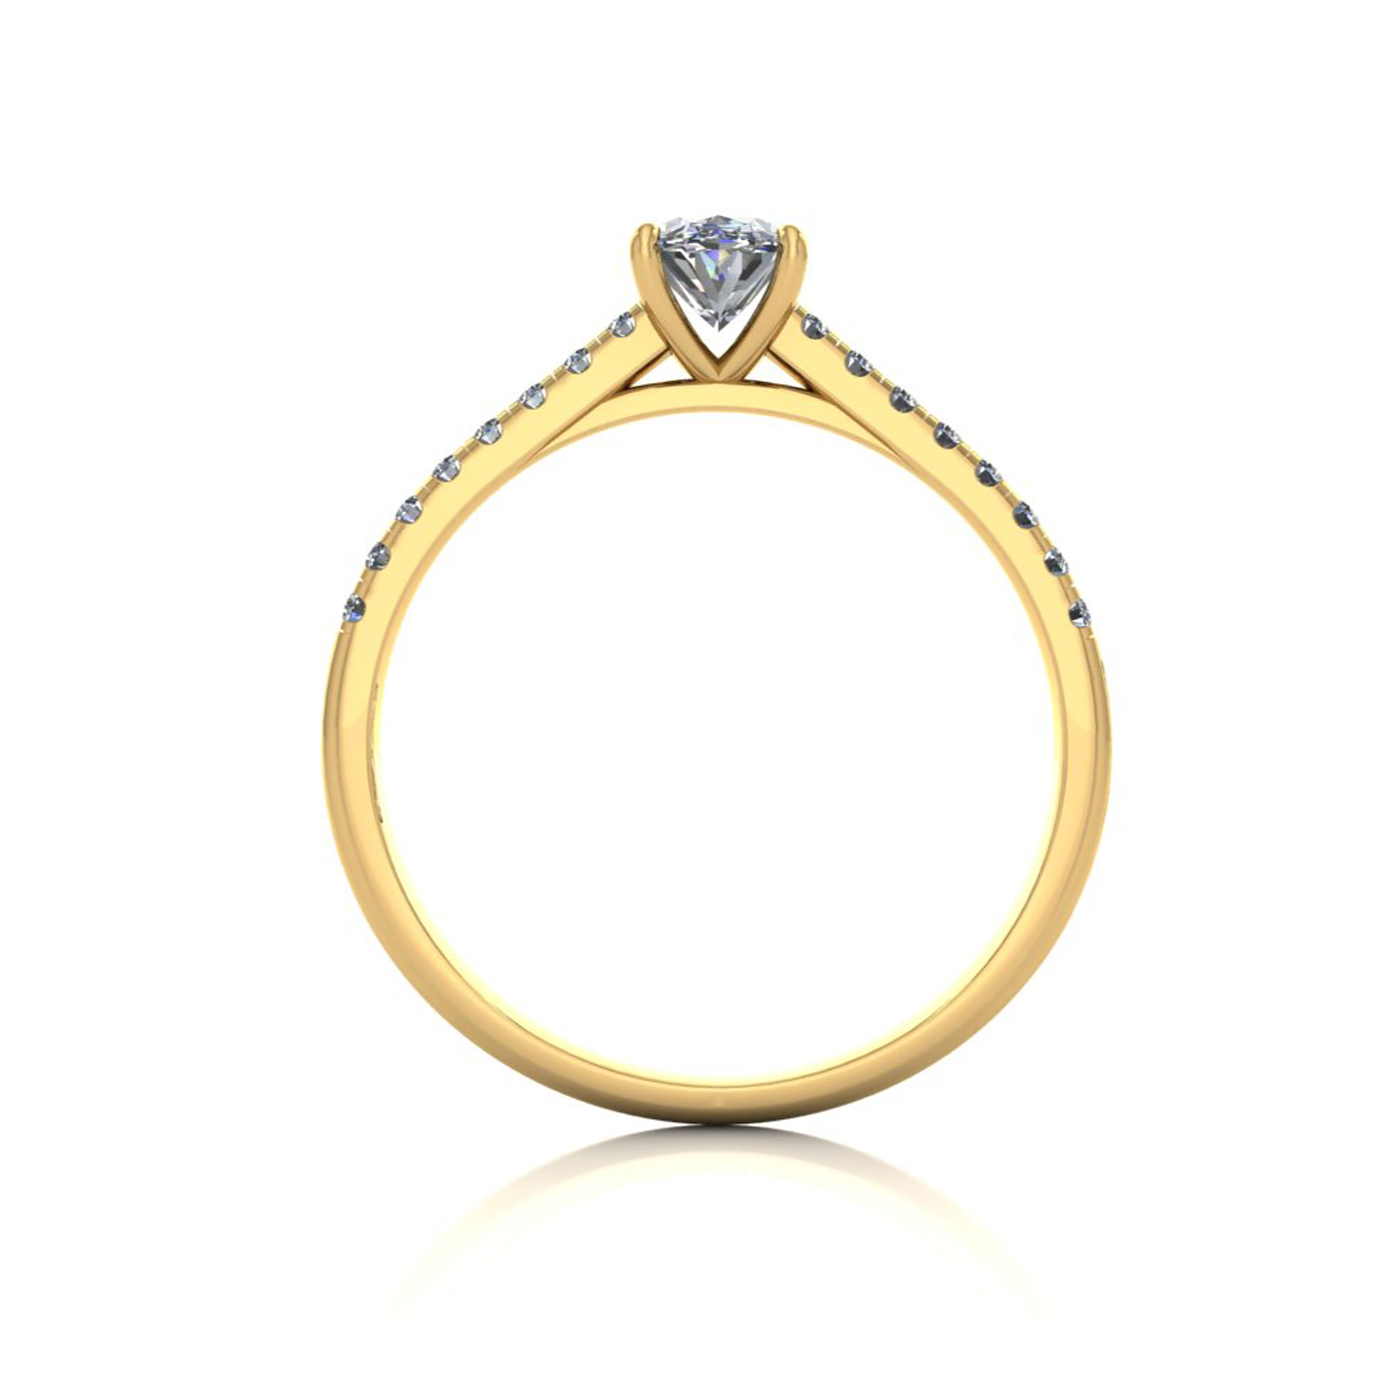 18k yellow gold  0,50 ct 4 prongs oval cut diamond engagement ring with whisper thin pavÉ set band